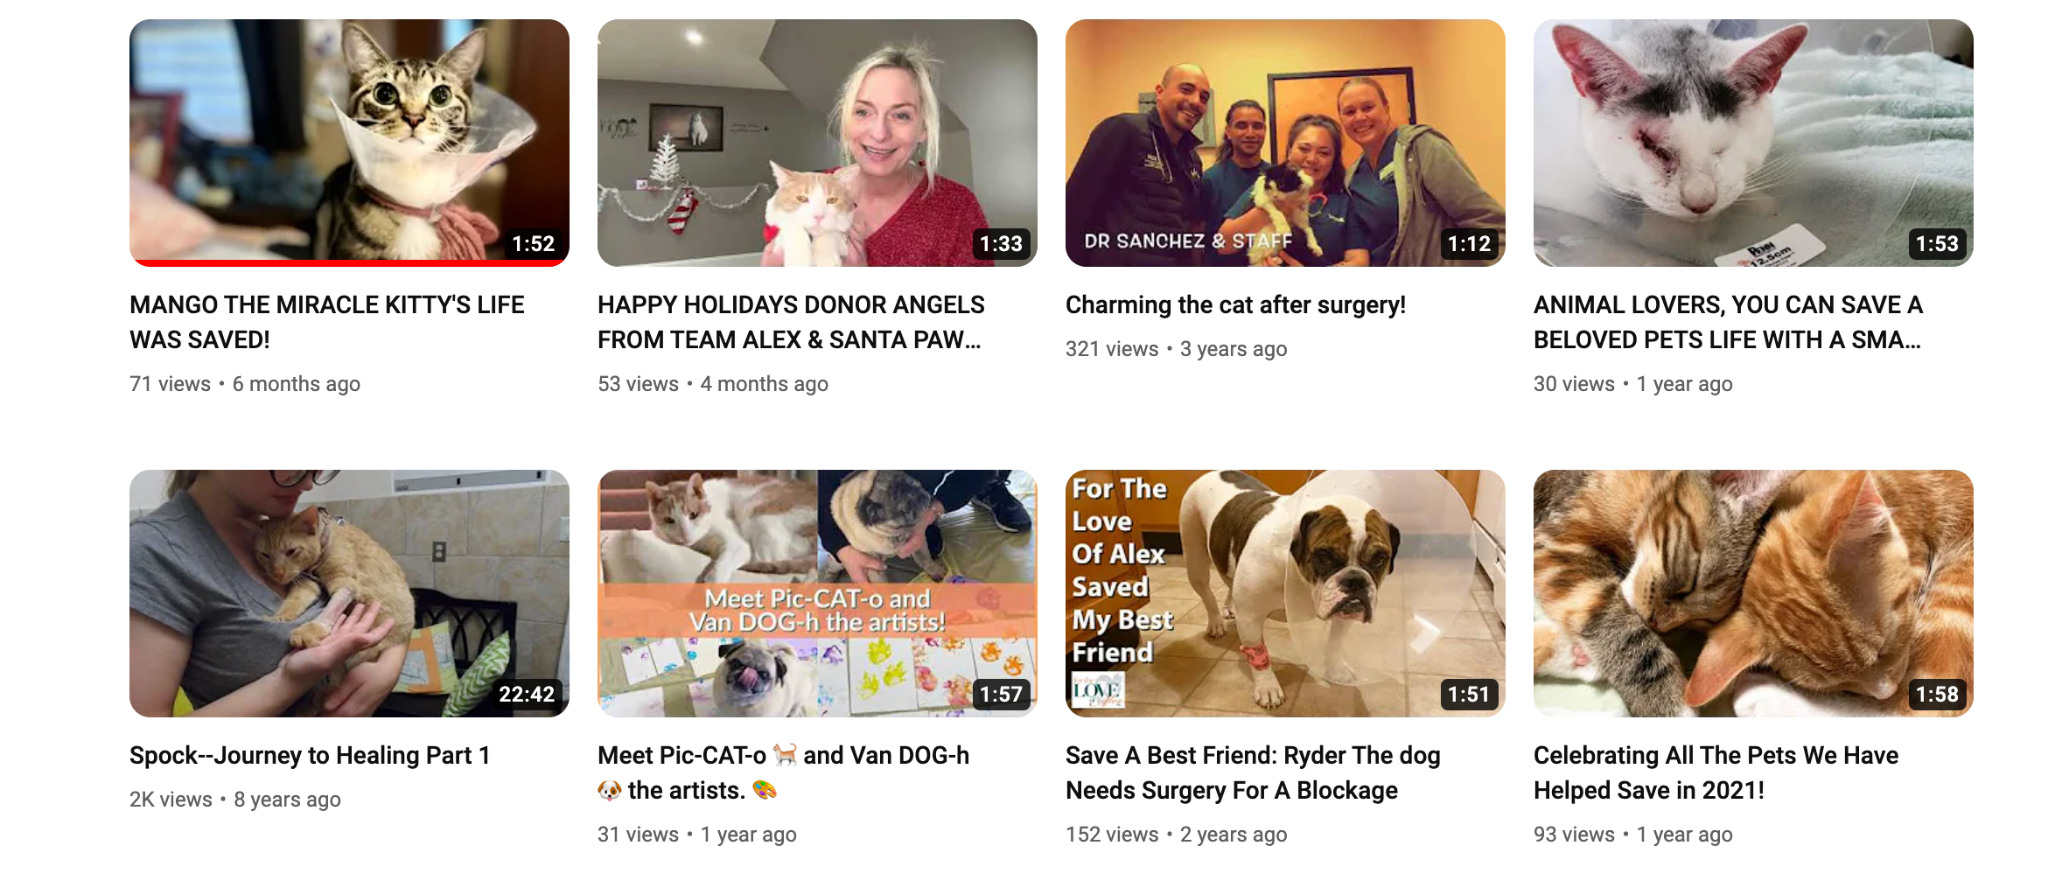 youtube content examples for nonprofits